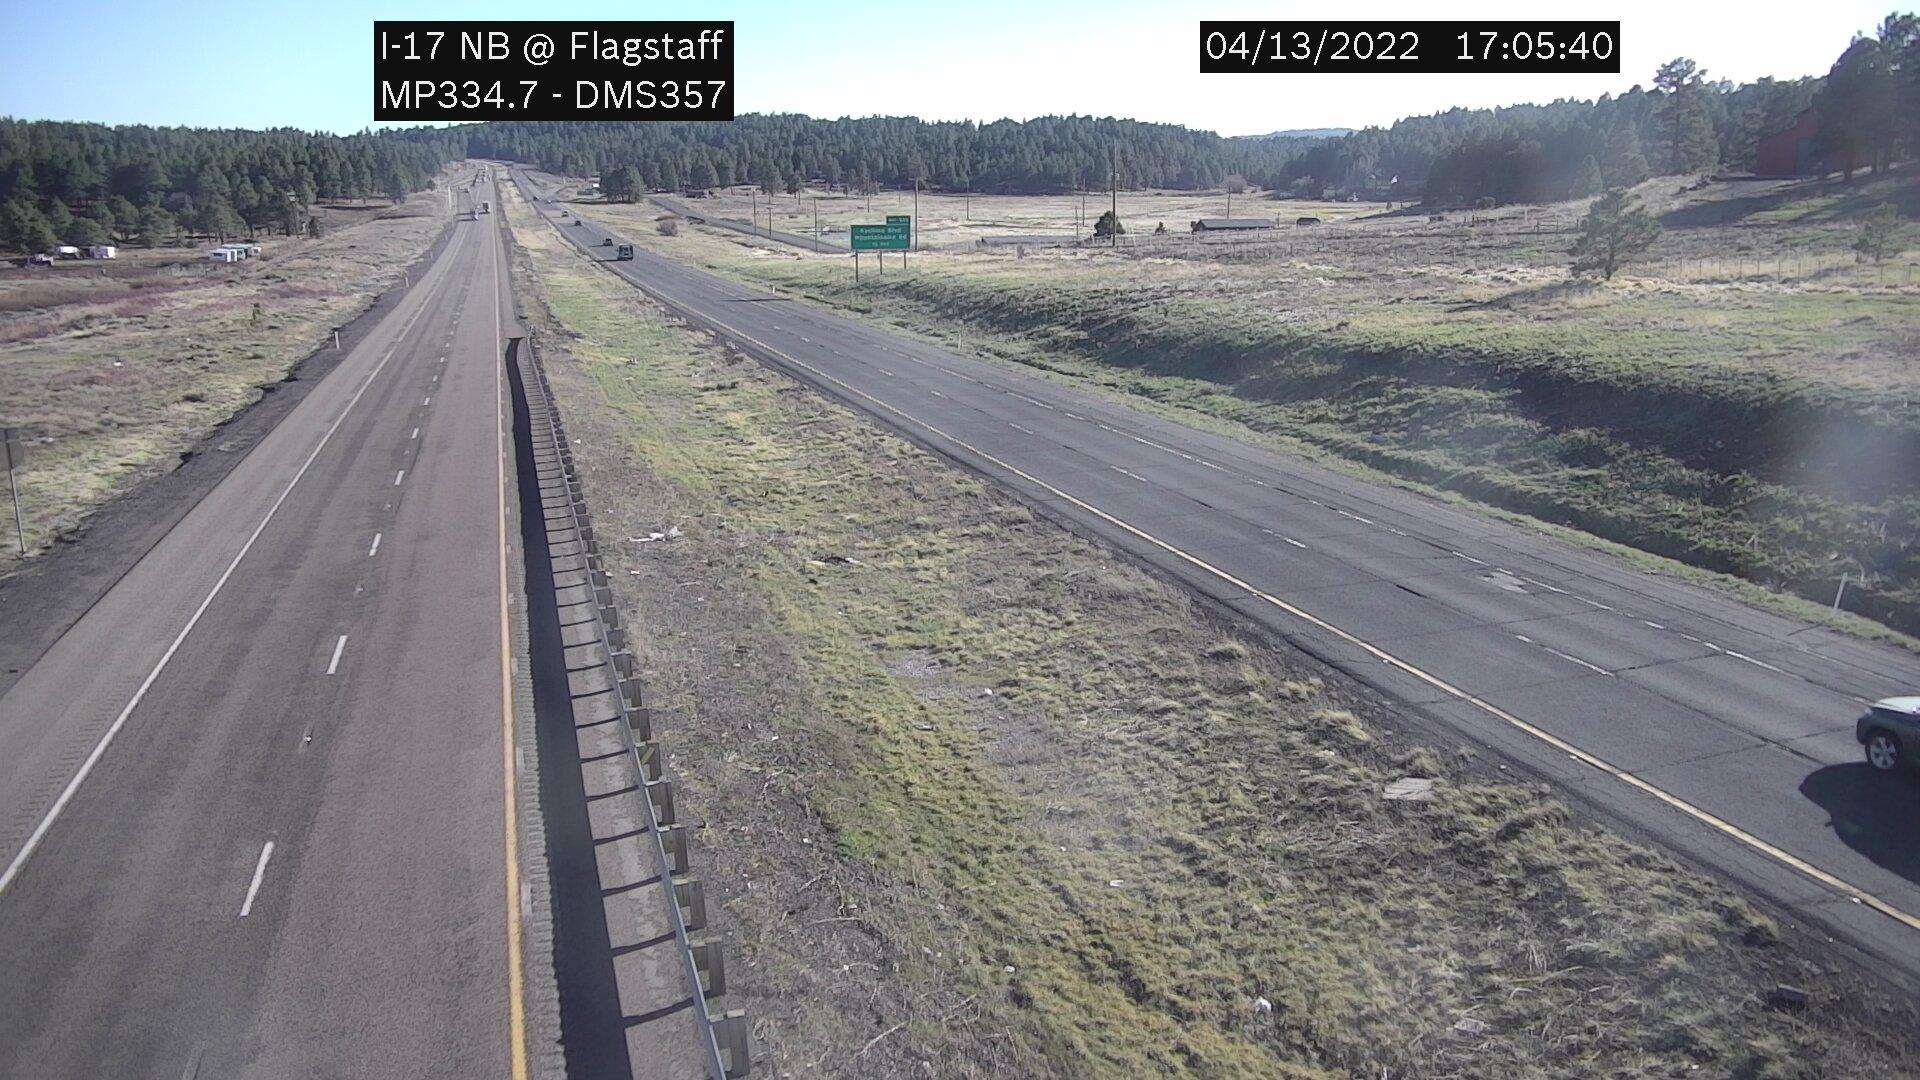 Traffic Cam Mountainaire › North: I-17 NB 334.70 @Flagstaff Player